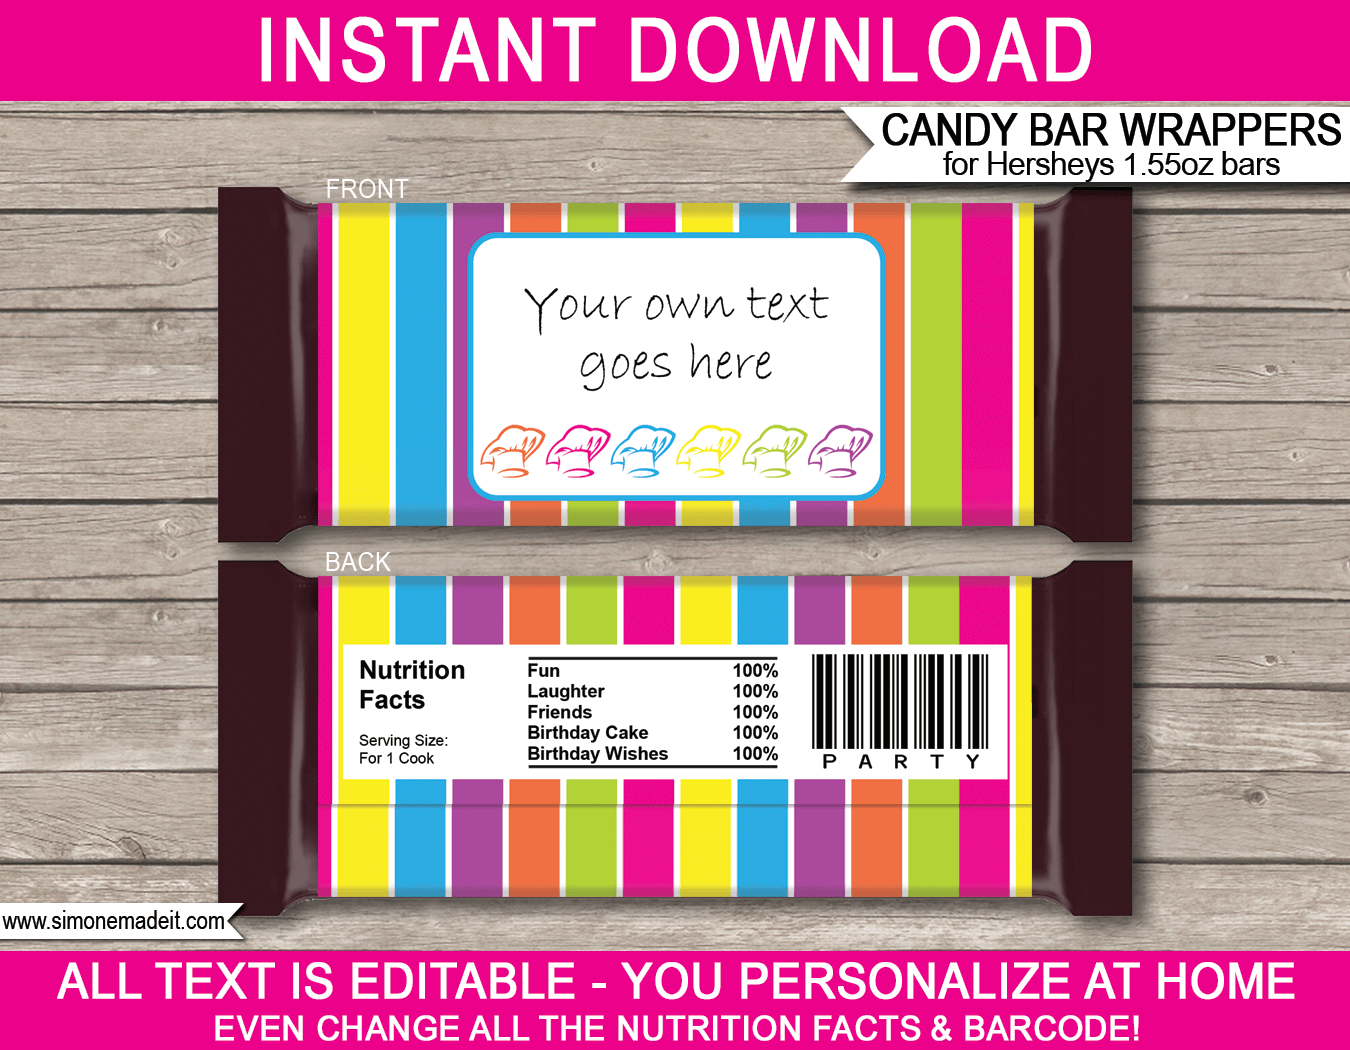 Candy Bar Wrapper Template For Mac - ameasysite Pertaining To Blank Candy Bar Wrapper Template For Word